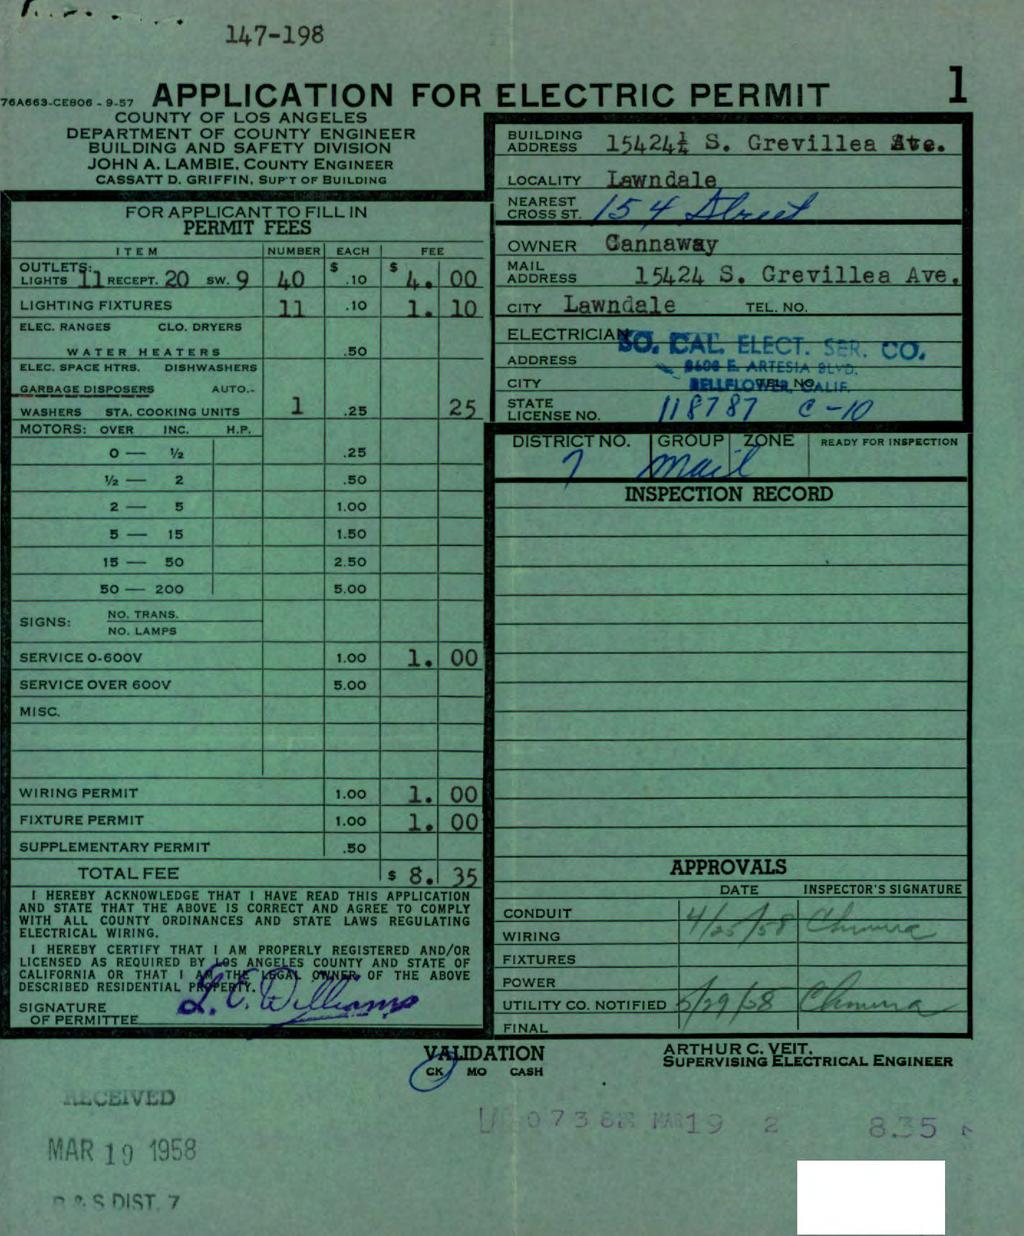 f. ^ 147-198 APPLICATION FOR ELECTRIC PERMIT 76A66$-CE806-8.57 COUNTY OF LOS ANGELES DEPARTMENT OF COUNTY ENGINEER JOHN A. LAMBIE.